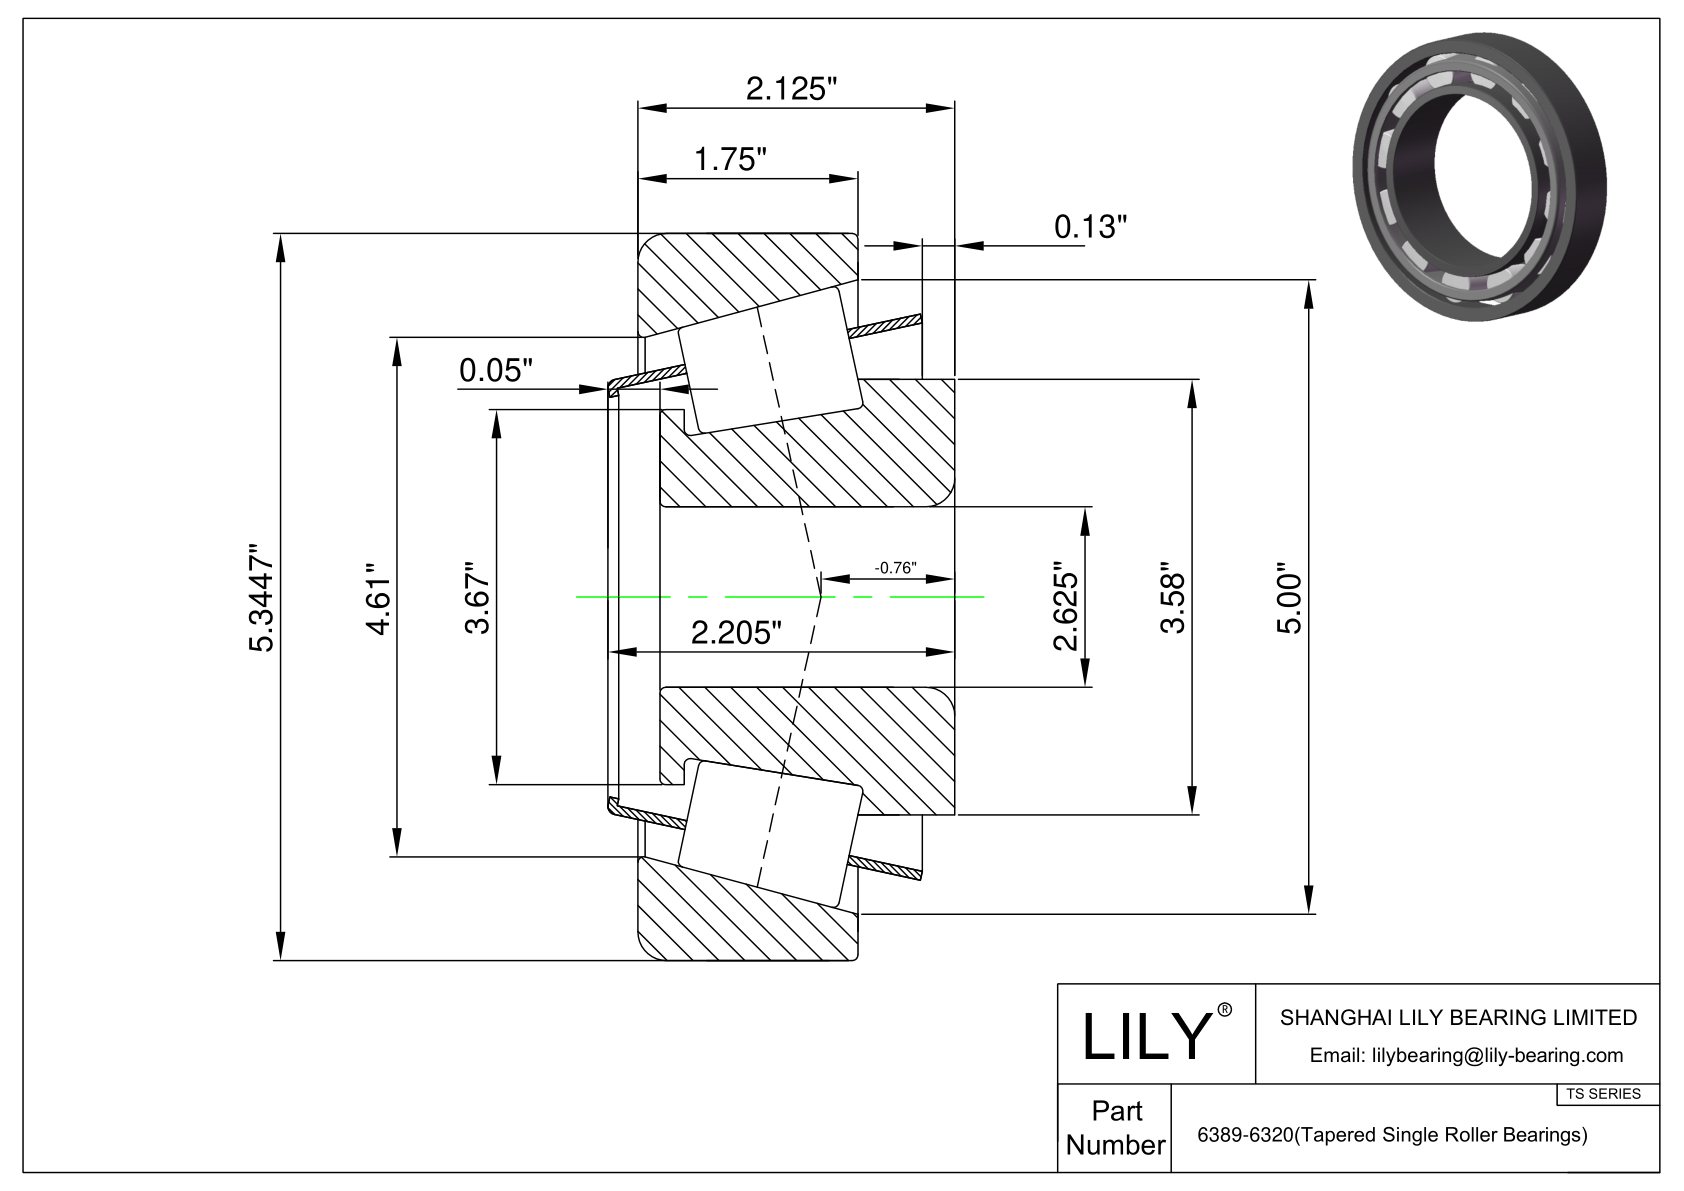 6389-6320 TS (Tapered Single Roller Bearings) (Imperial) cad drawing